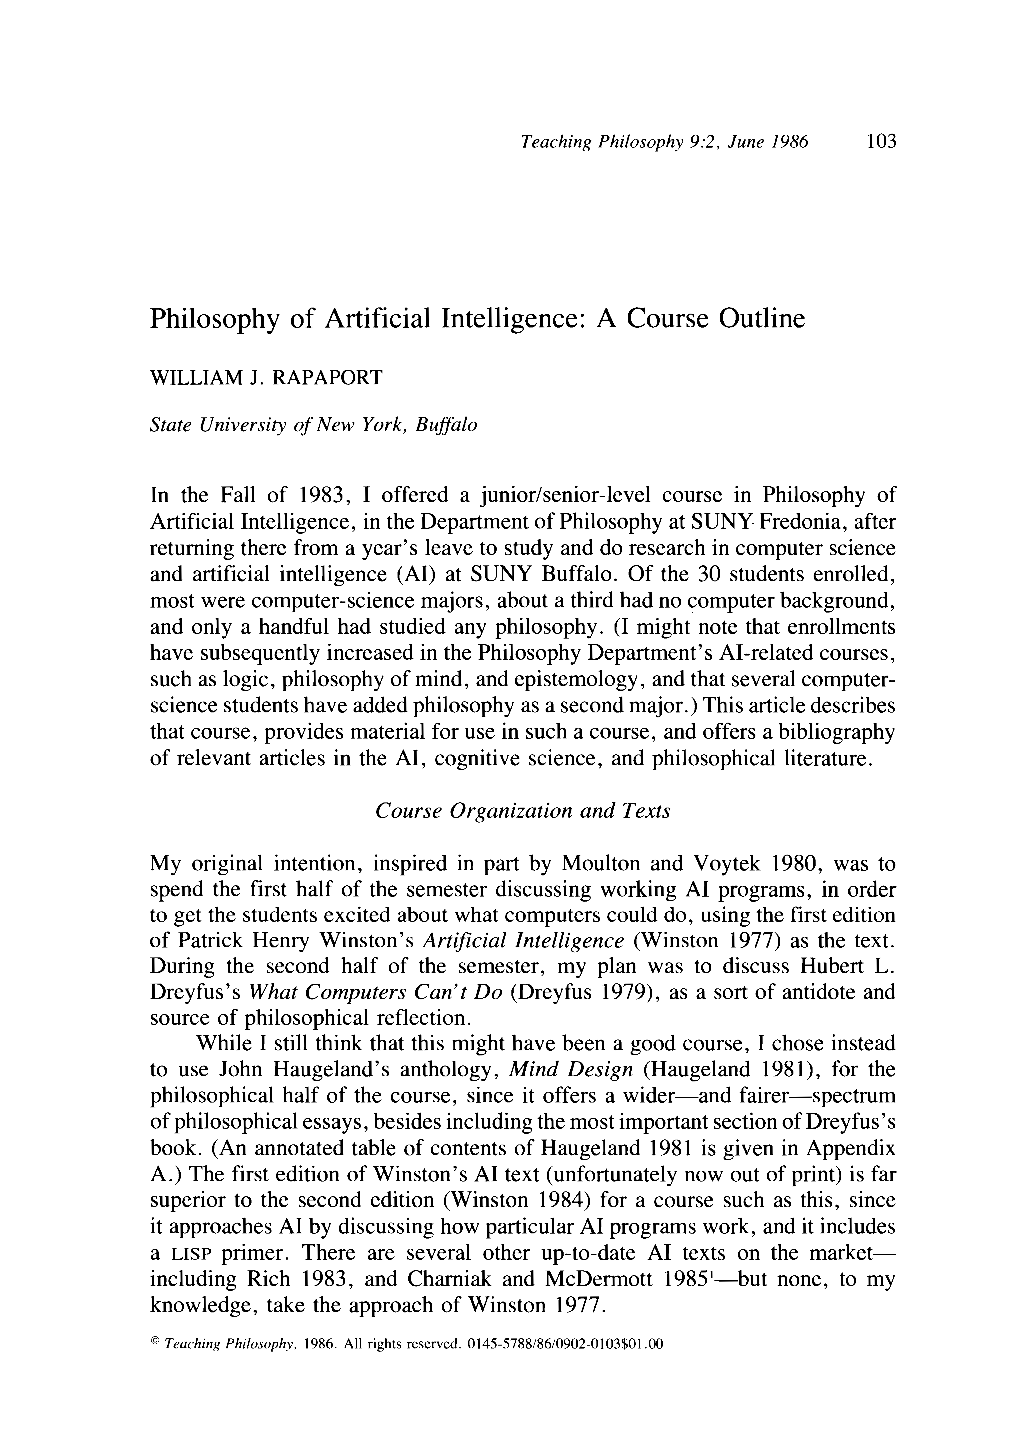 Philosophy of Artificial Intelligence: a Course Outline